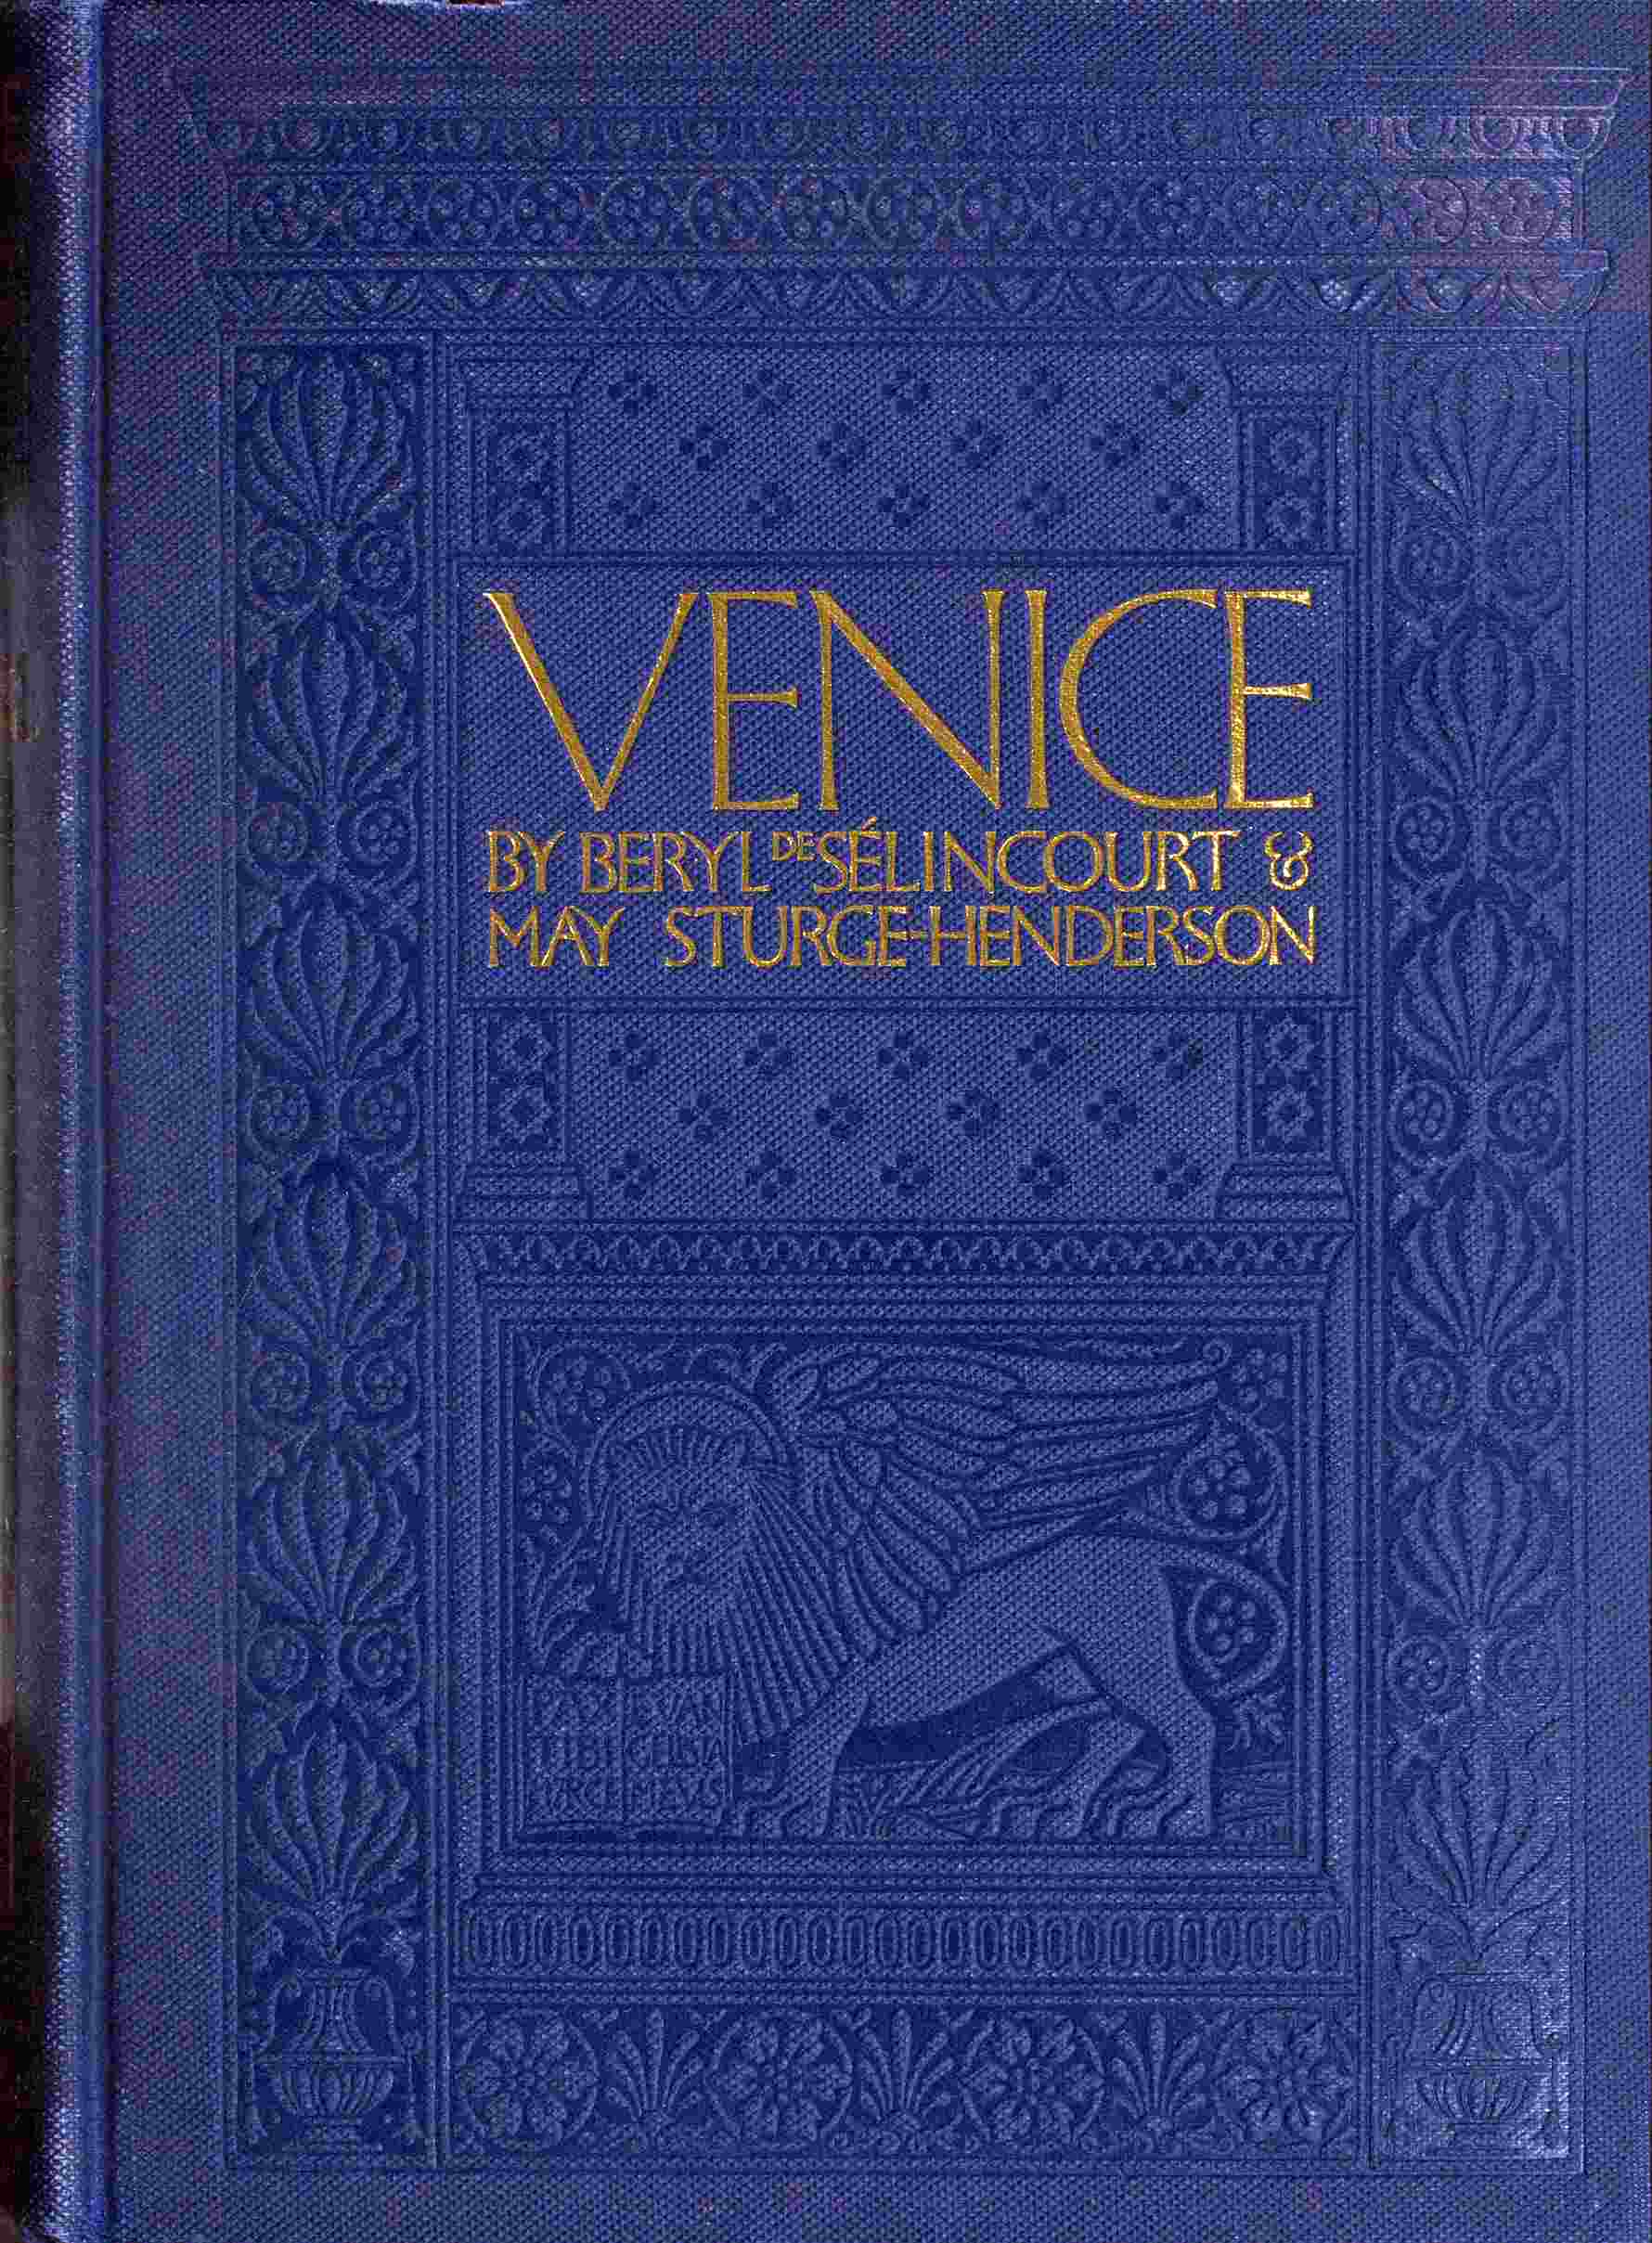 Venice, by Beryl De Sélincourt and May Sturge Henderson—A Project